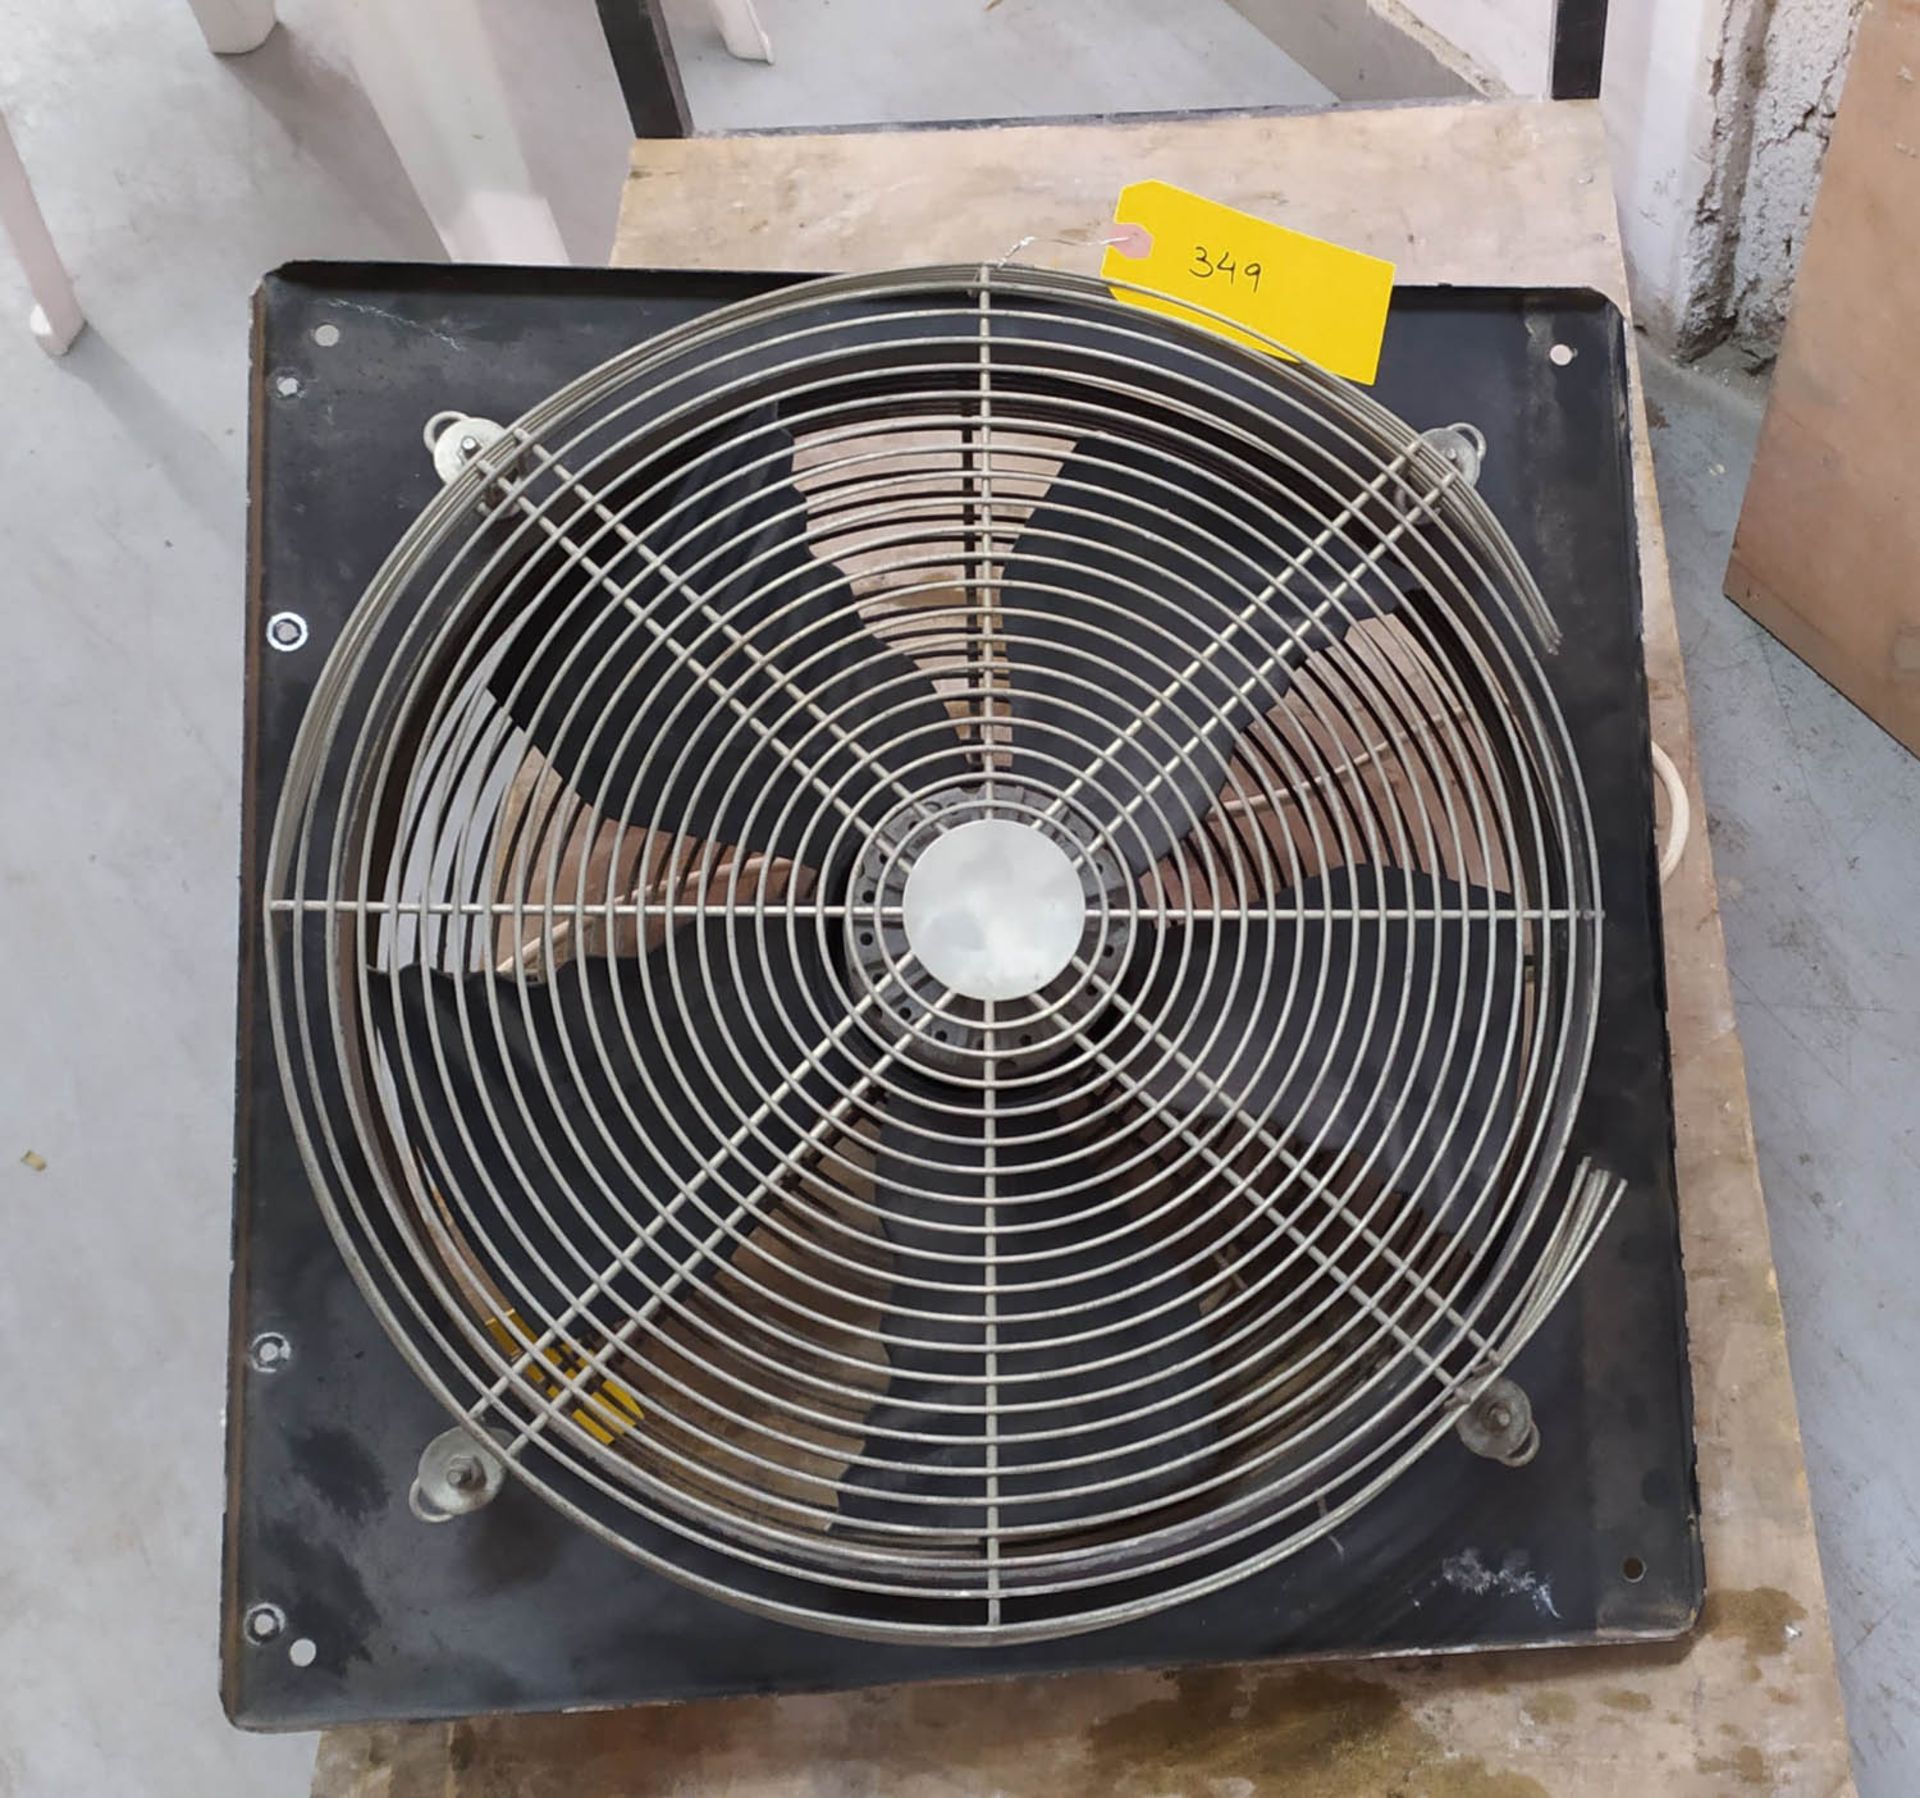 HIDRIA VENT FAN; 230V; 50HZ; 300 WATT; 1.35 AMP; 1250 RPM, S/N: R11R-45SPB-4M-5756 [A#349][LOCATED